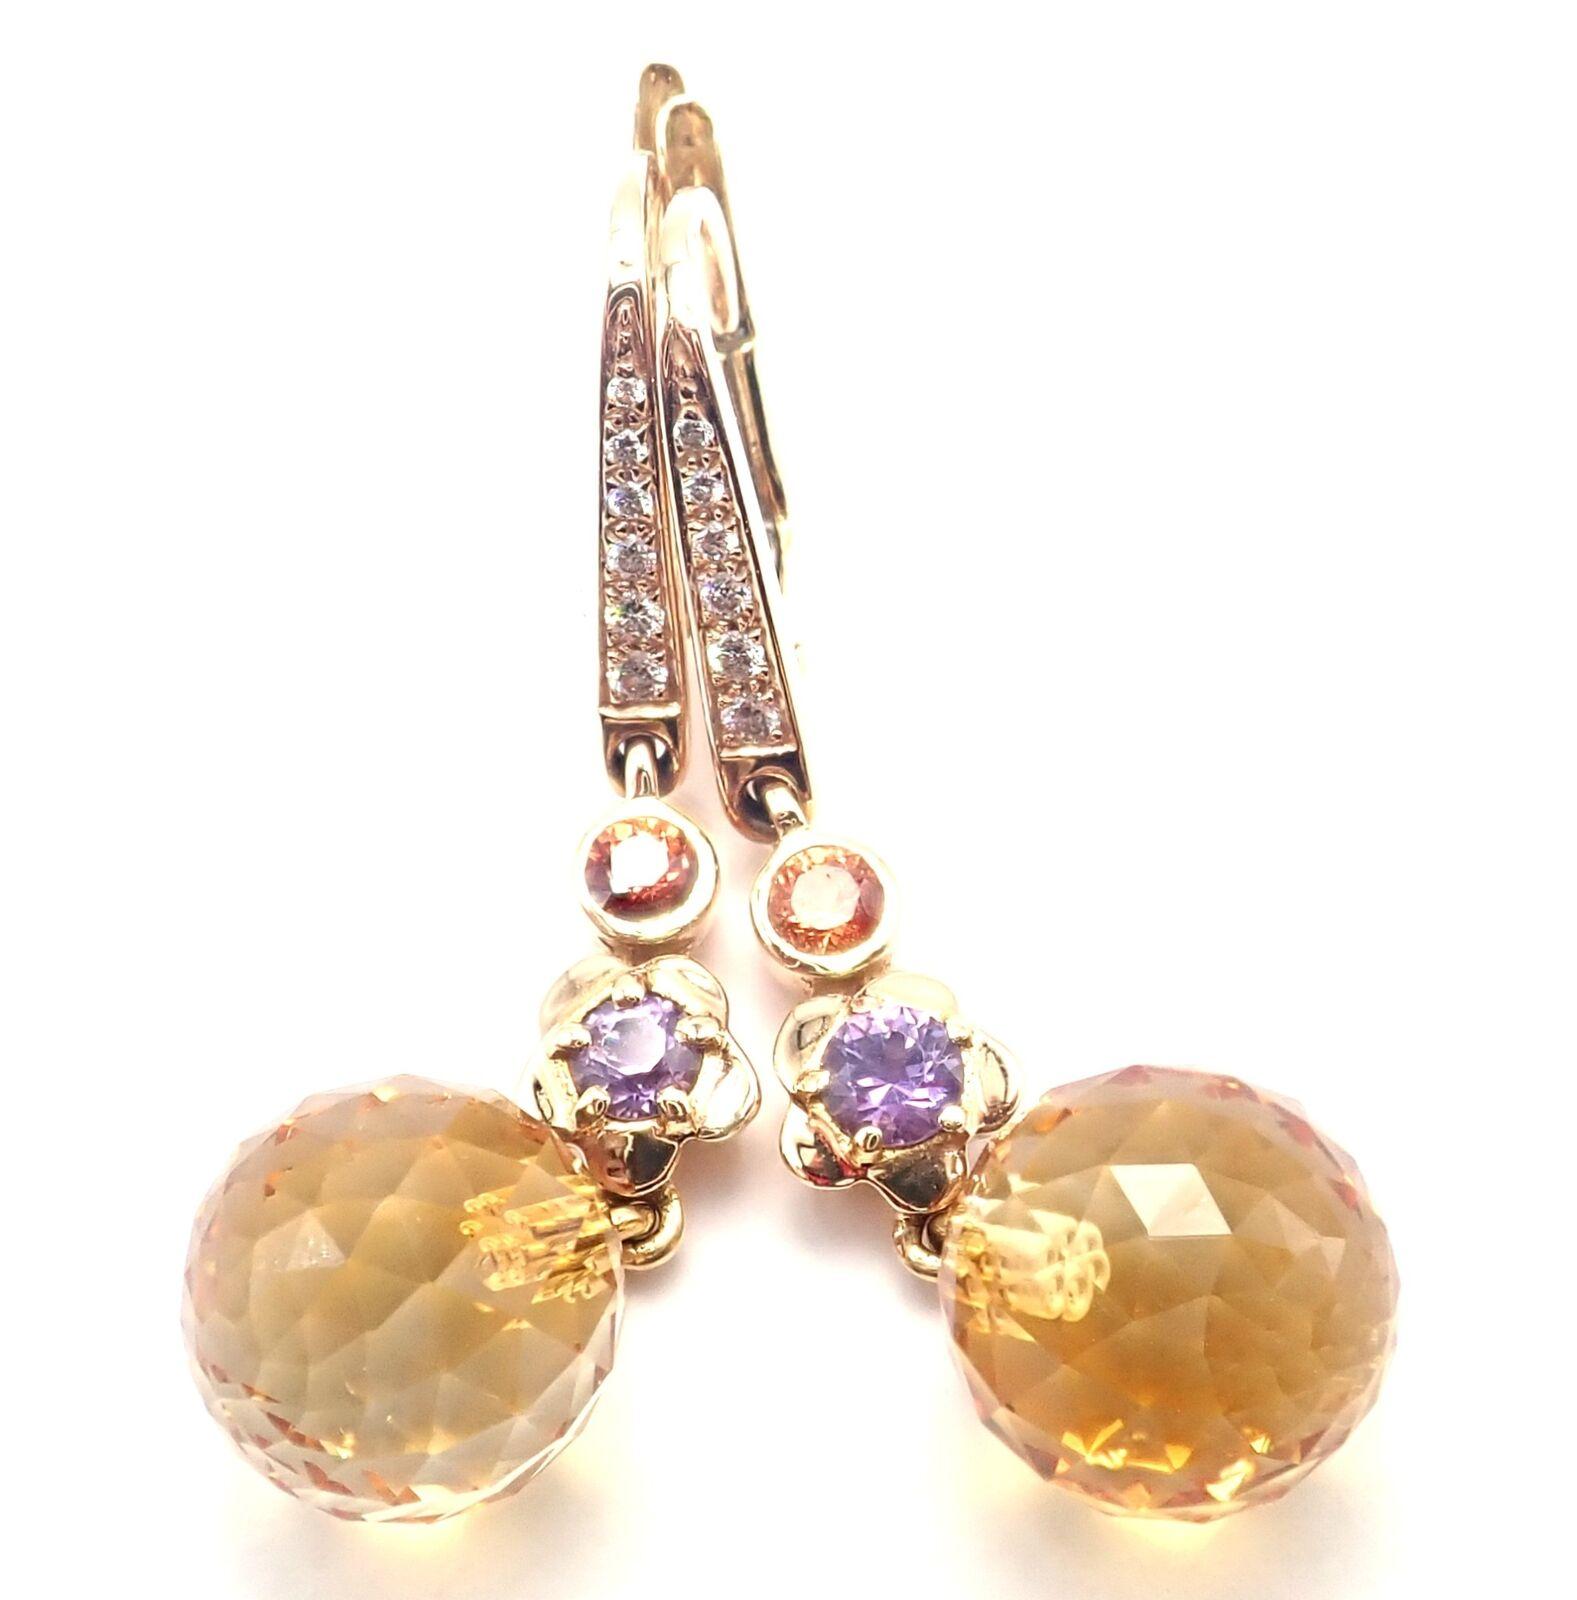 18k Yellow Gold Diamond Diamond Amethyst Citrine Mademoiselle Earrings by Chanel. 
With 2 Beads of faceted Citrine stones
12 round brilliant cut diamonds
2 round amethysts
2 round spersastite garnets
These earrings are made for pierced